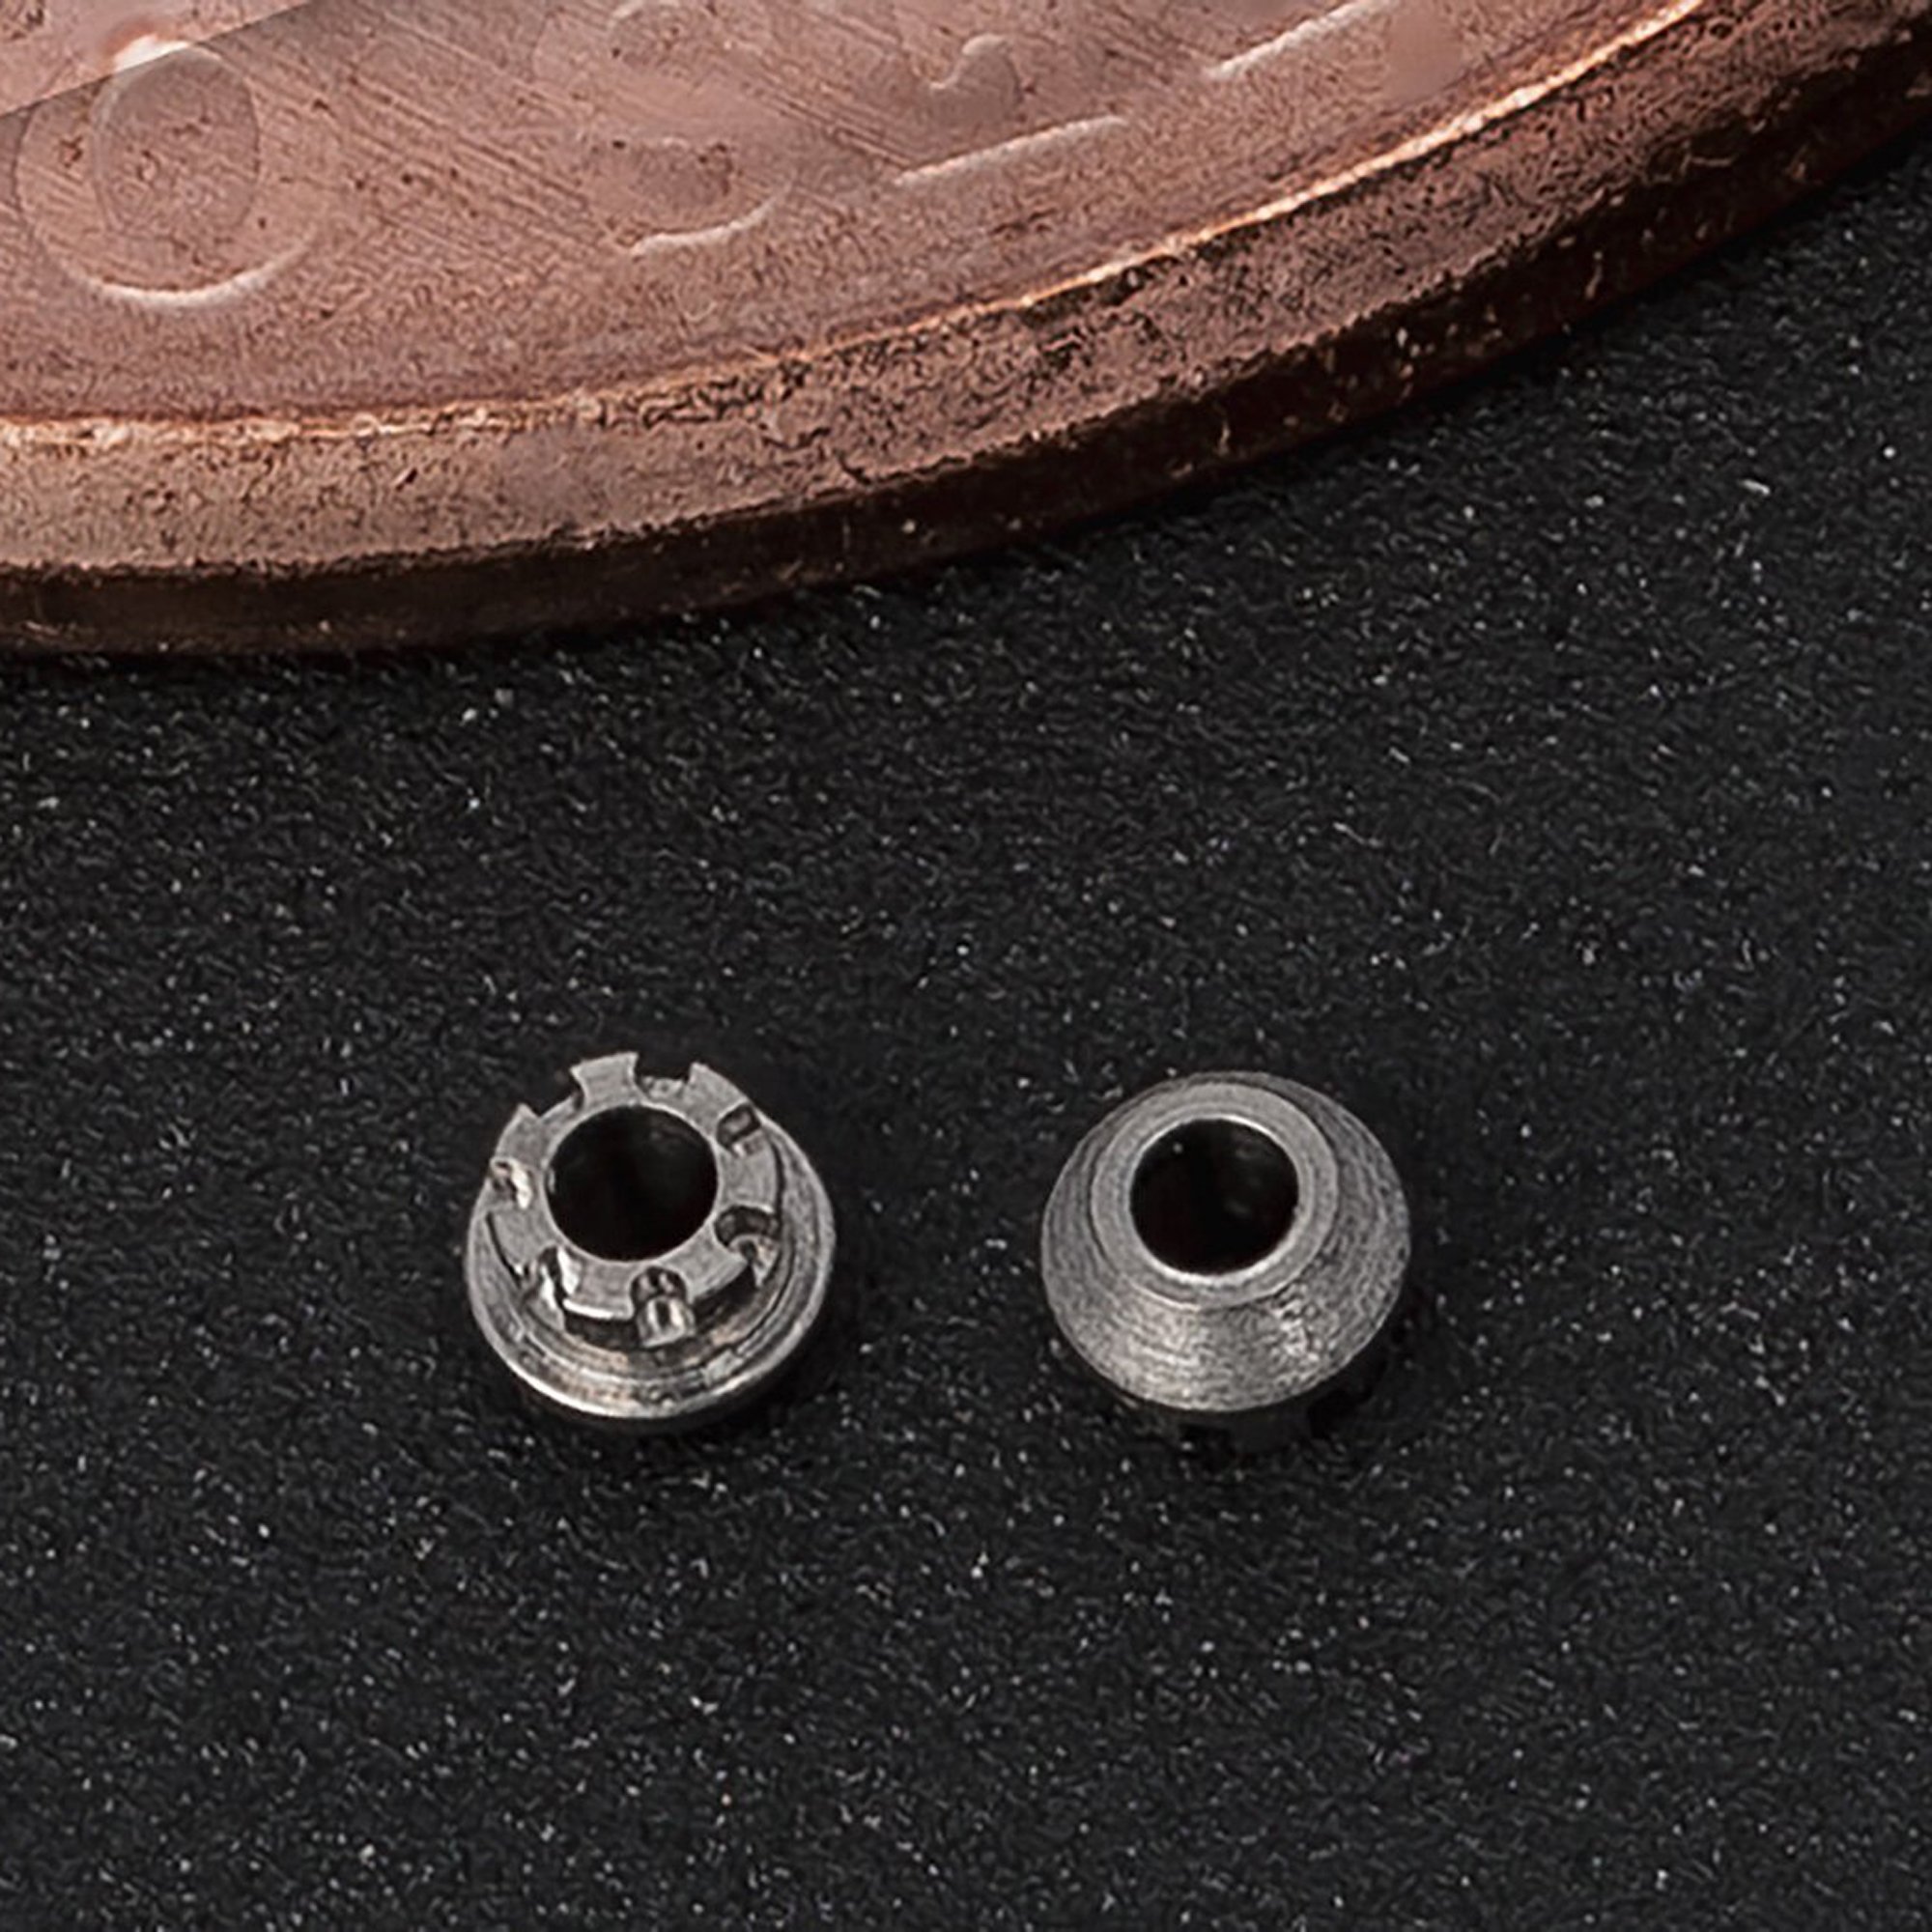  Closeup photograph of small machined parts next to a penny for scale. Details in the part are seen in the photo 